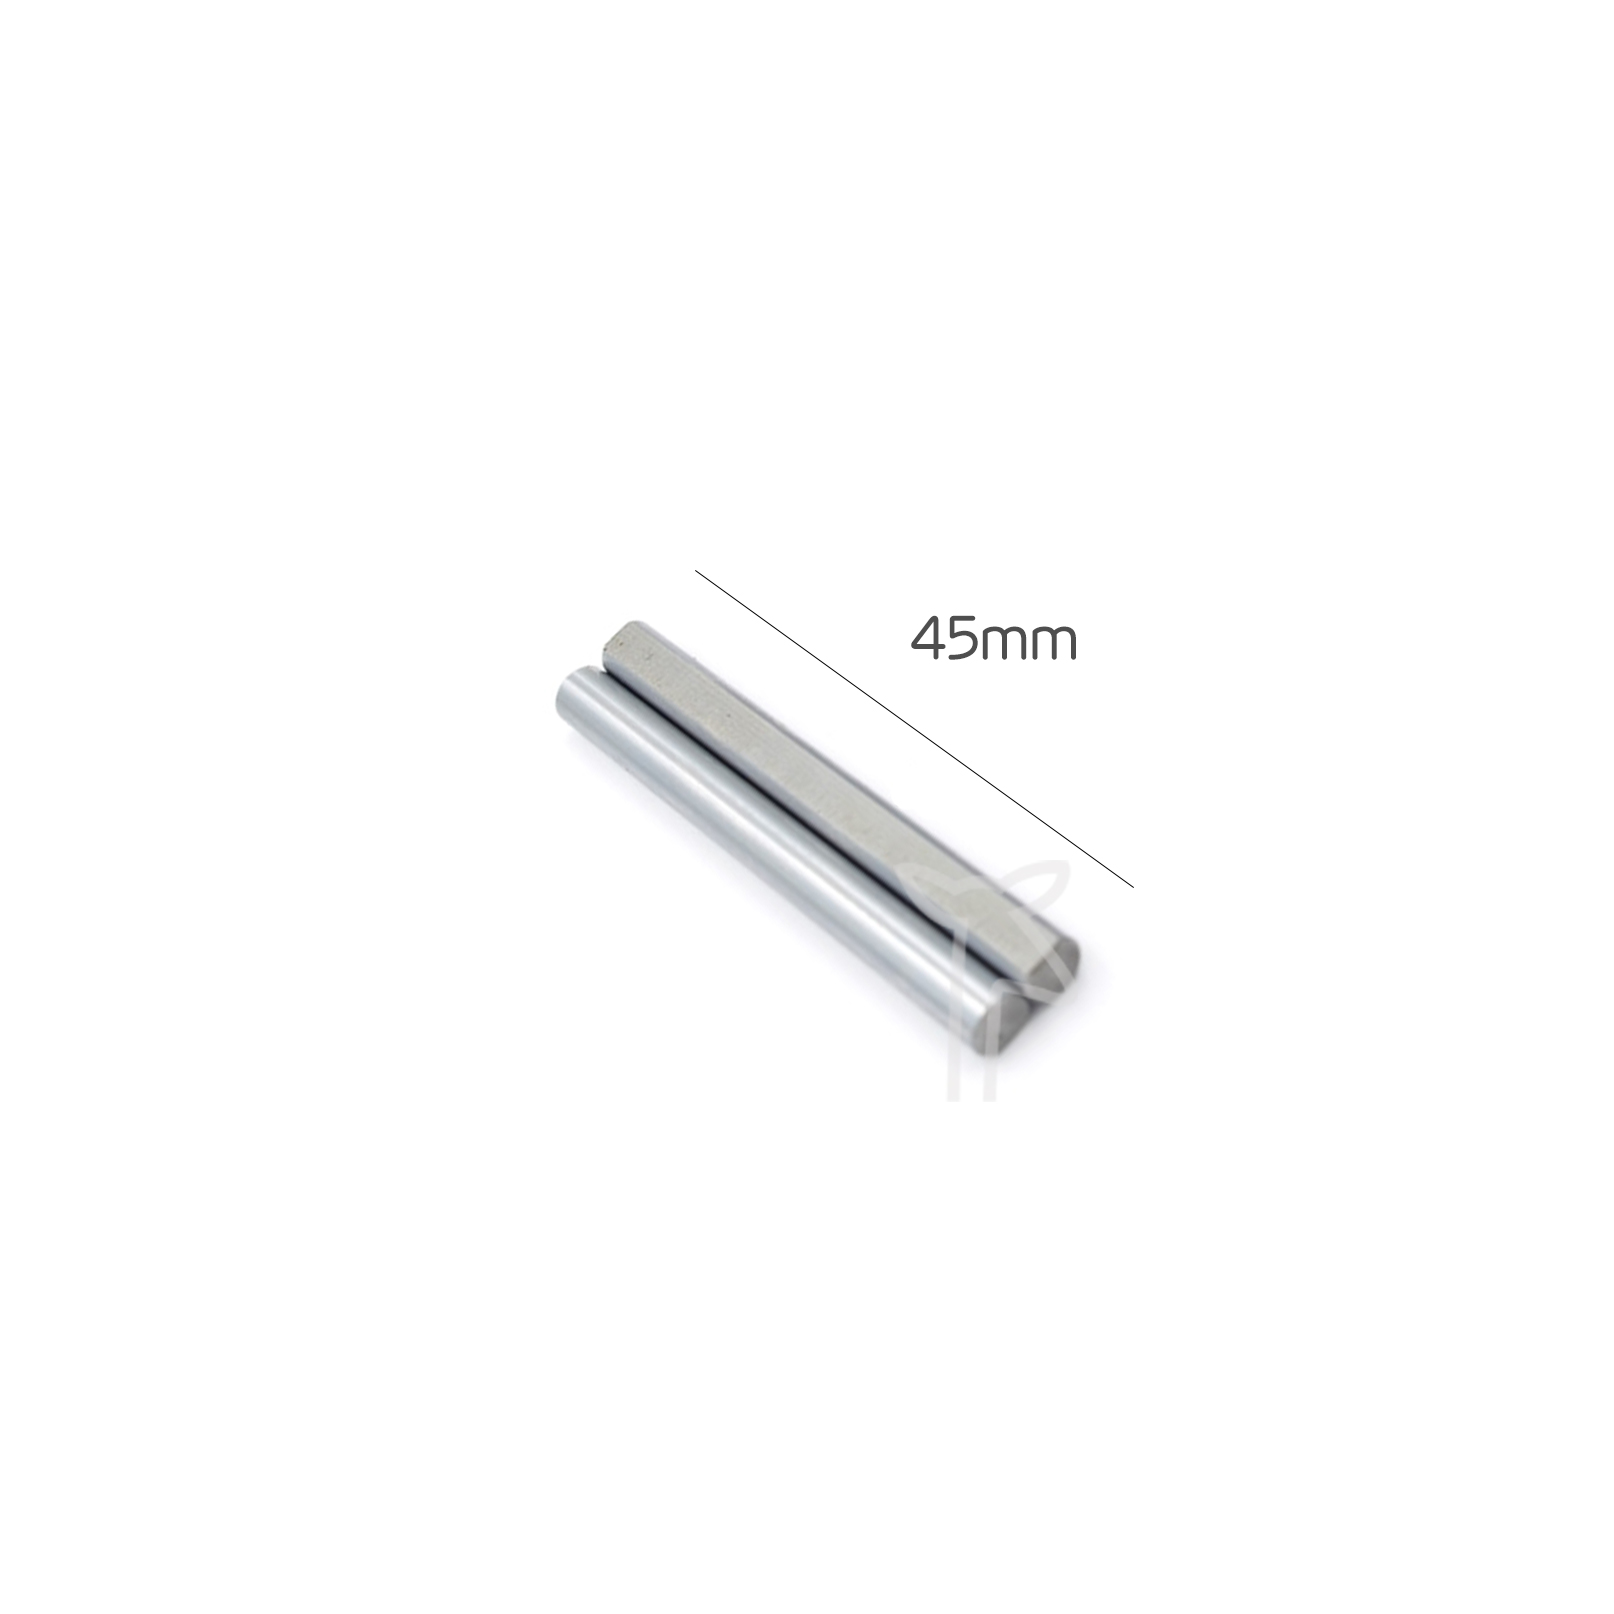 45mm D Shaft for Zaribo Geared Extruder